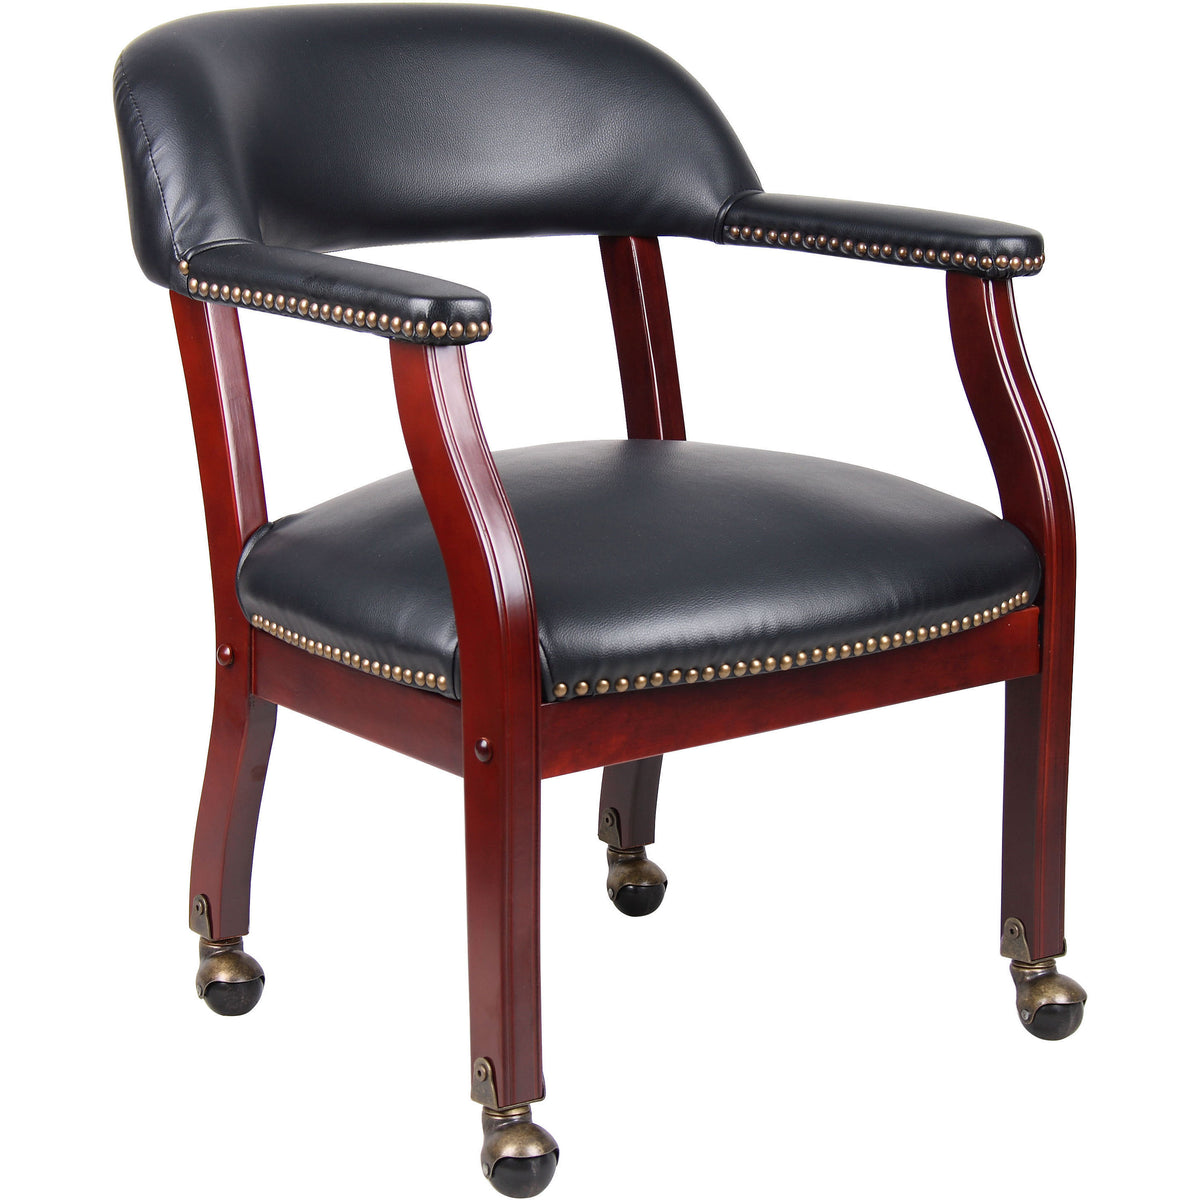 Captain's guest, accent or dining chair in Black Vinyl with Casters, B9545-BK